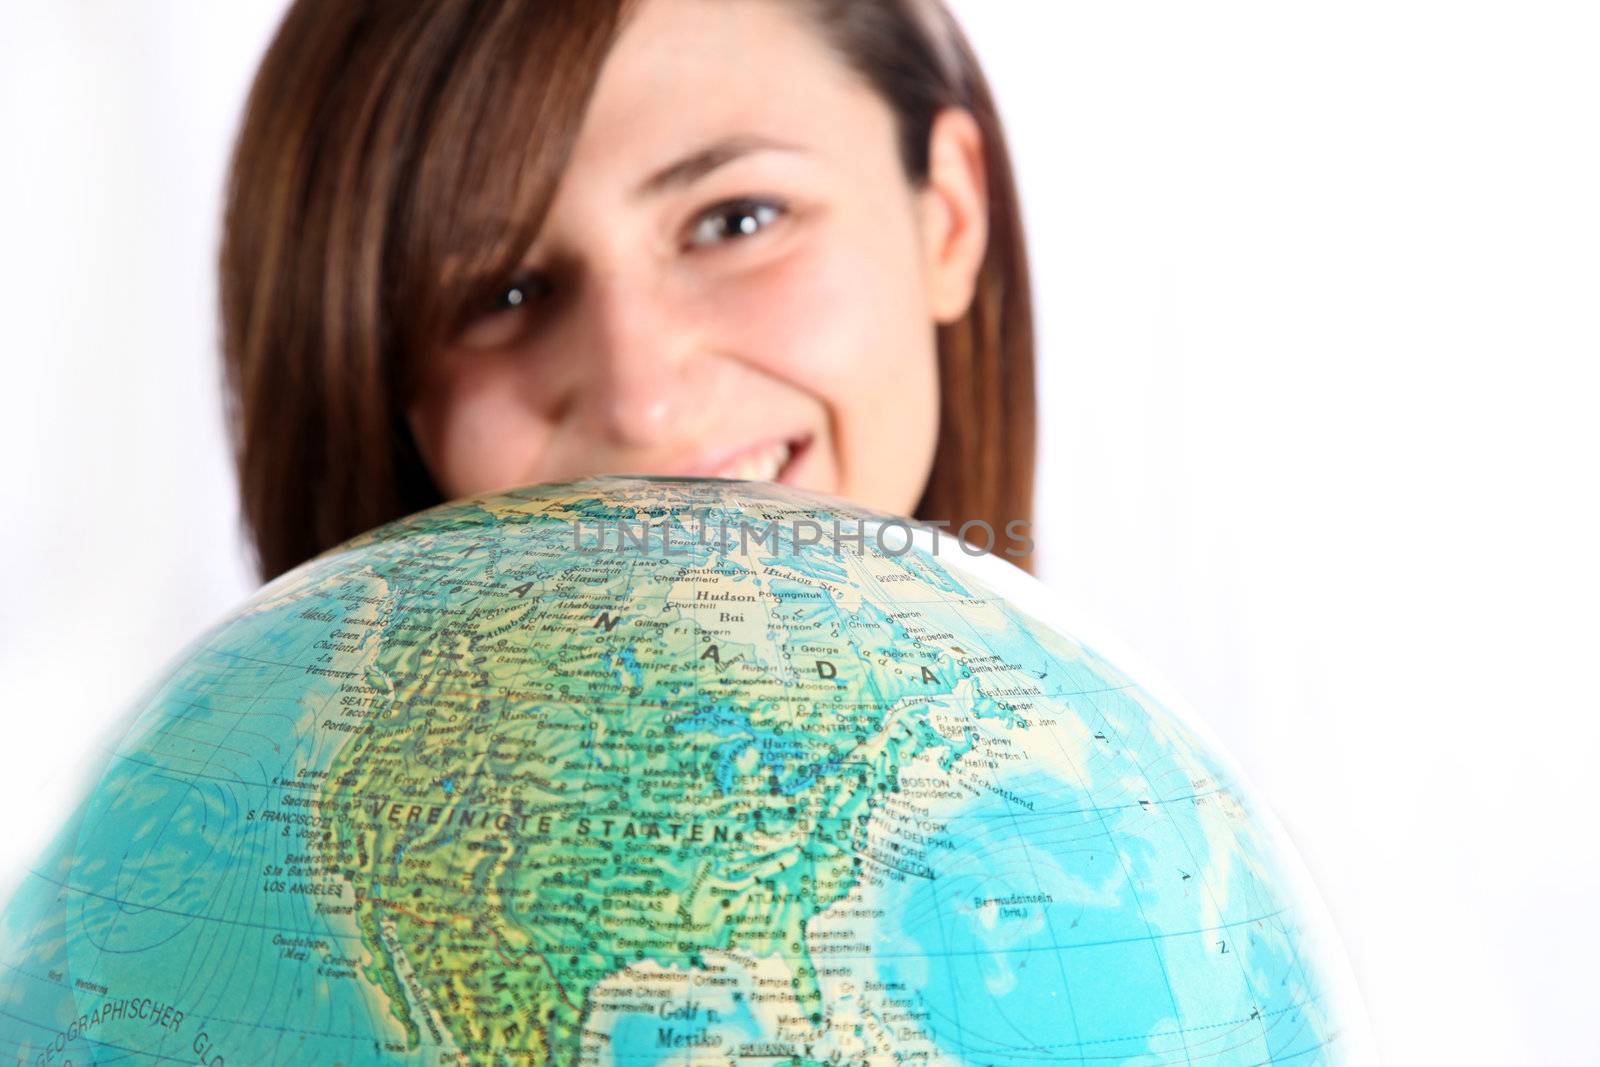 Smiling woman looking over a globe. The globe is in the foreground, the woman in the background out of focus.